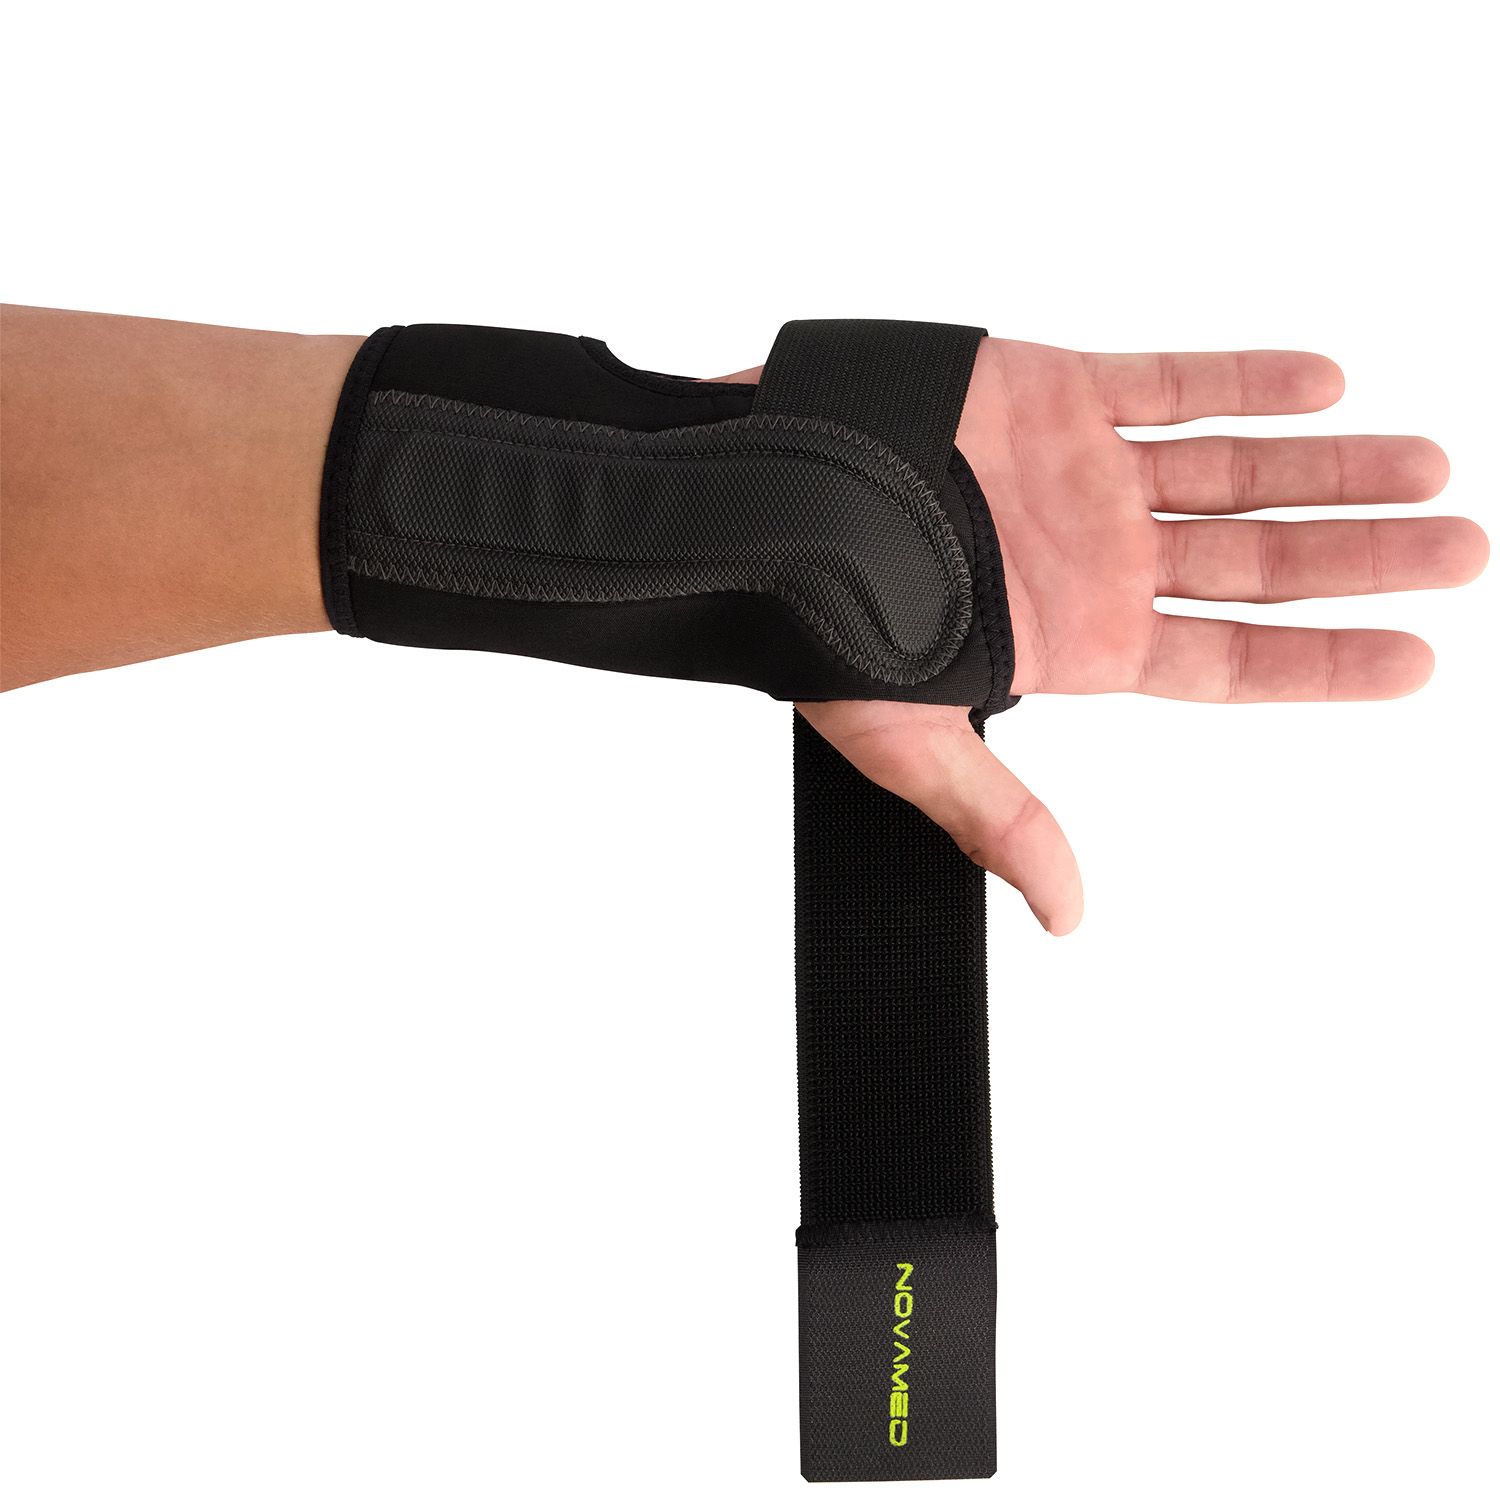 novamed lightweight wrist support with Velcro strap stretched